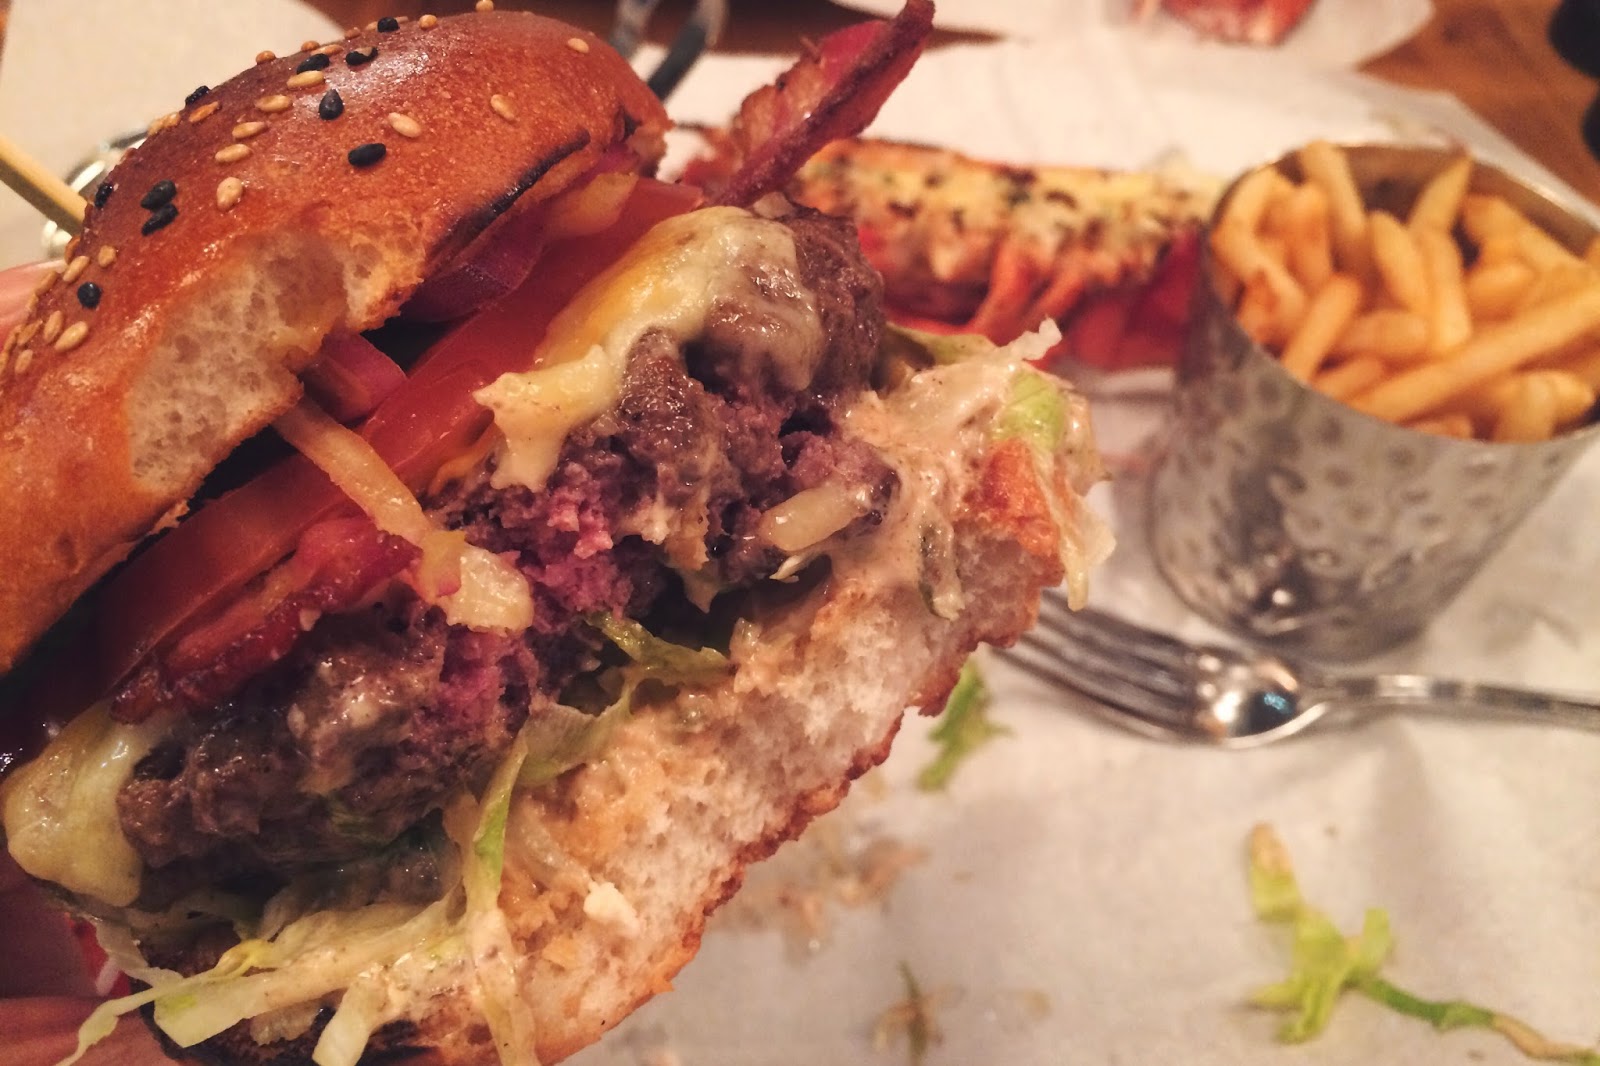 Burger and Lobster review, Soho